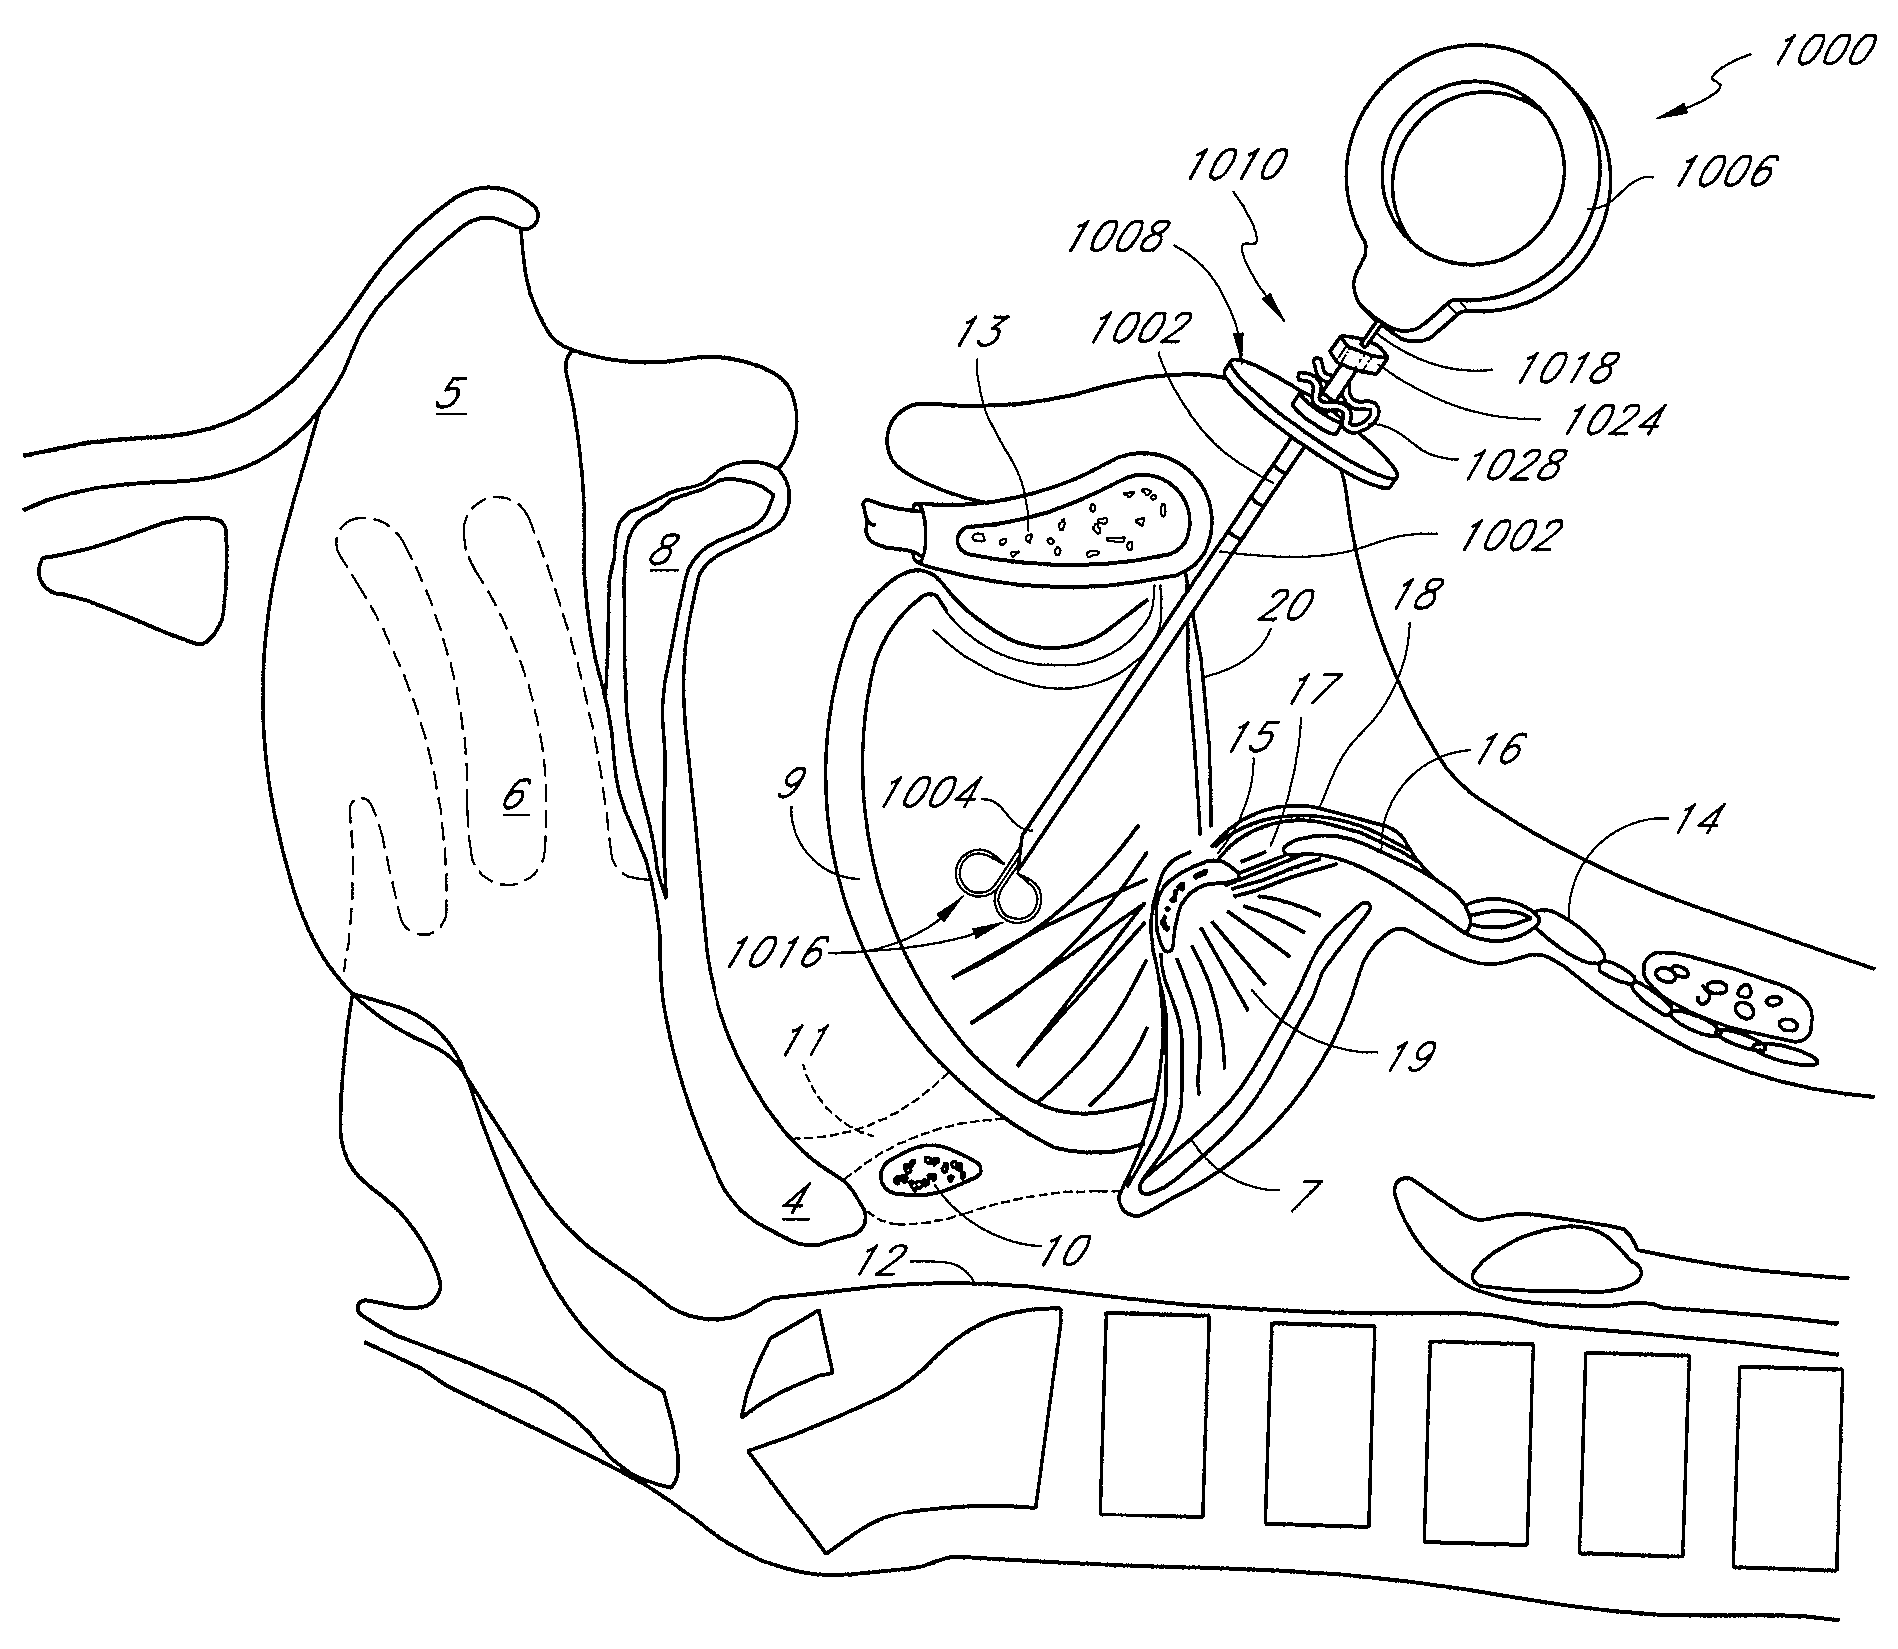 System and method for temporary tongue suspension